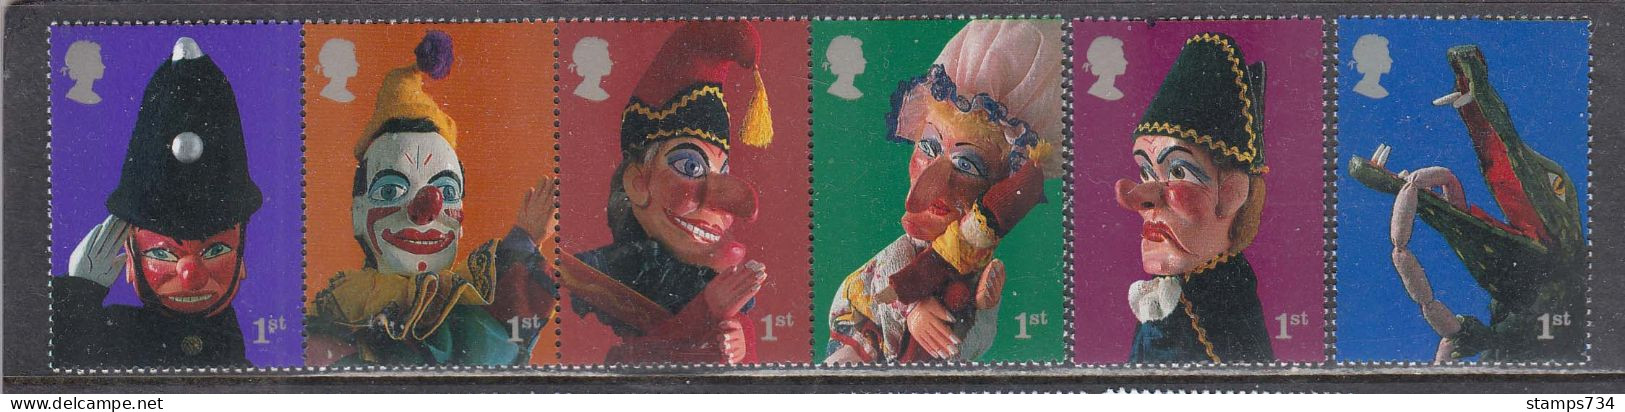 Great Britain 2001 - Hand Puppet Theater: Punch And Judy, Set Of 6 Stamps, MNH** - Unused Stamps